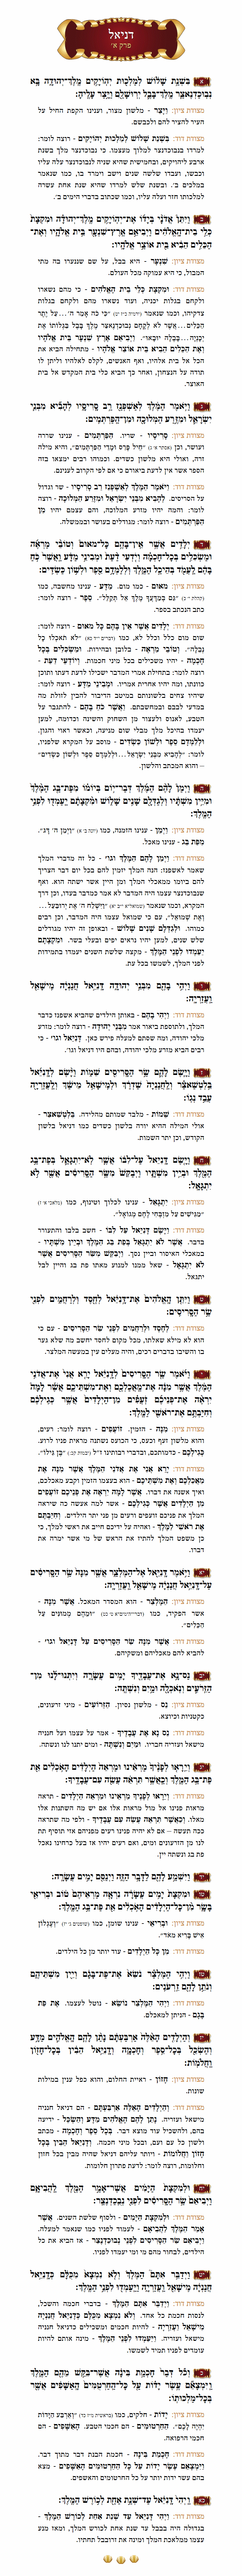 Sefer Daniel Chapter 1 with commentary